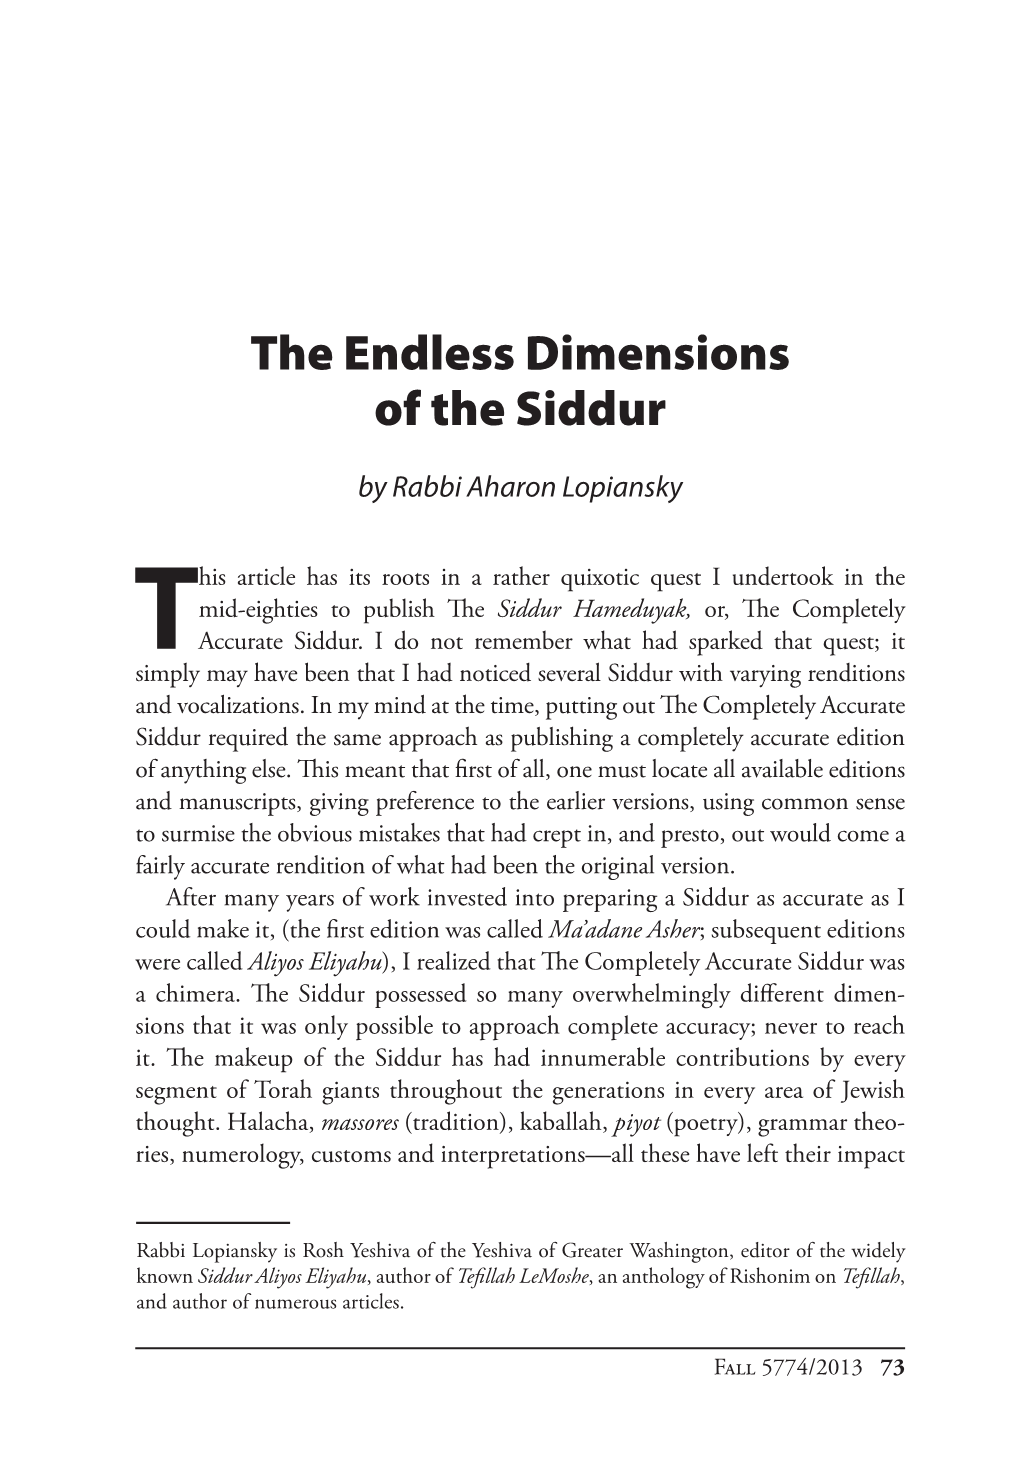 The Endless Dimensions of the Siddur.Pdf